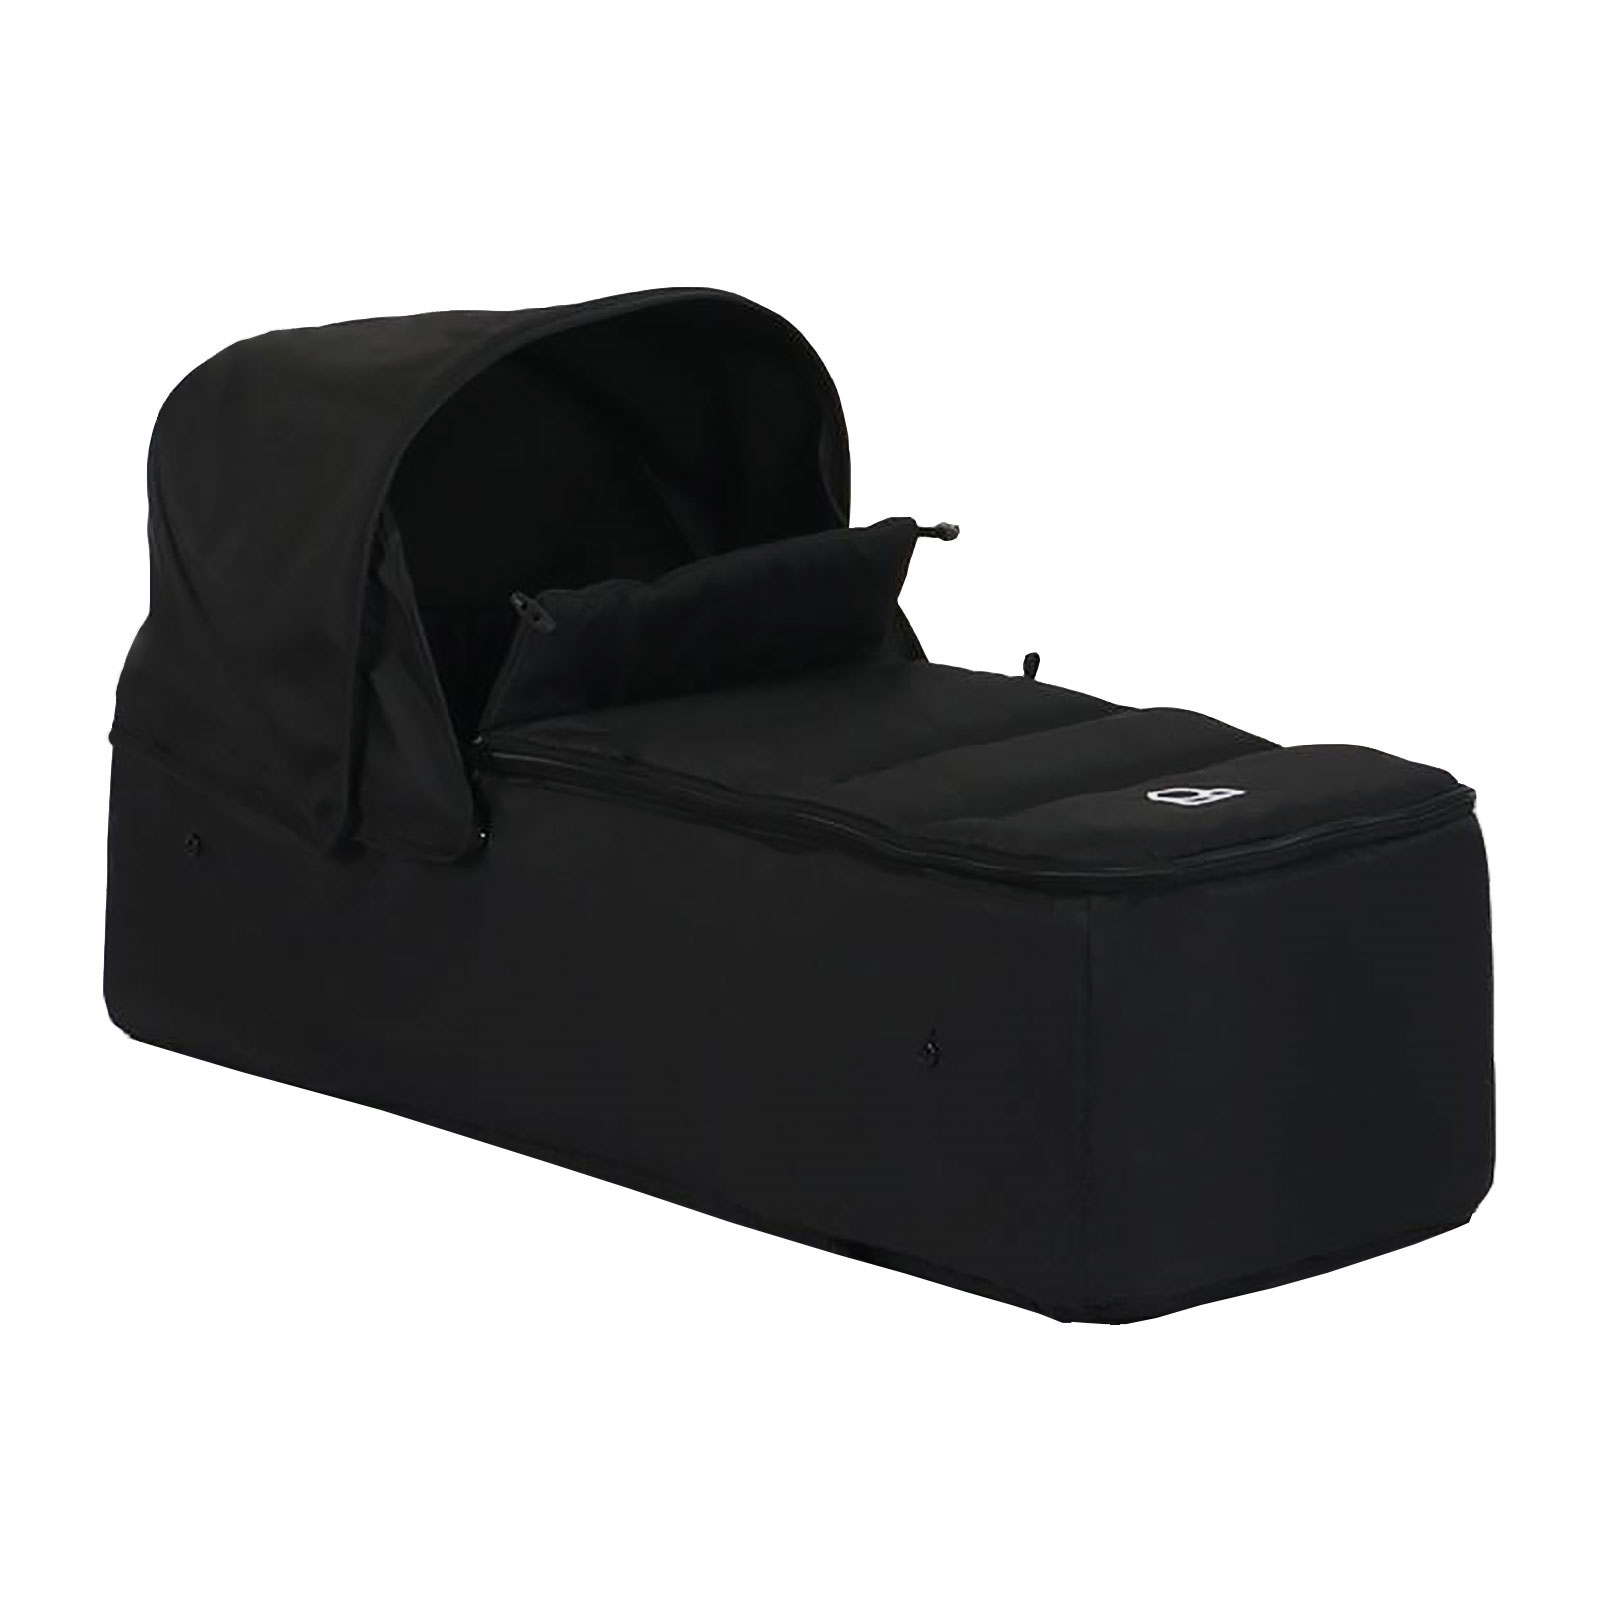 Puggle Urban City Soft Carrycot With Hood - Storm Black				